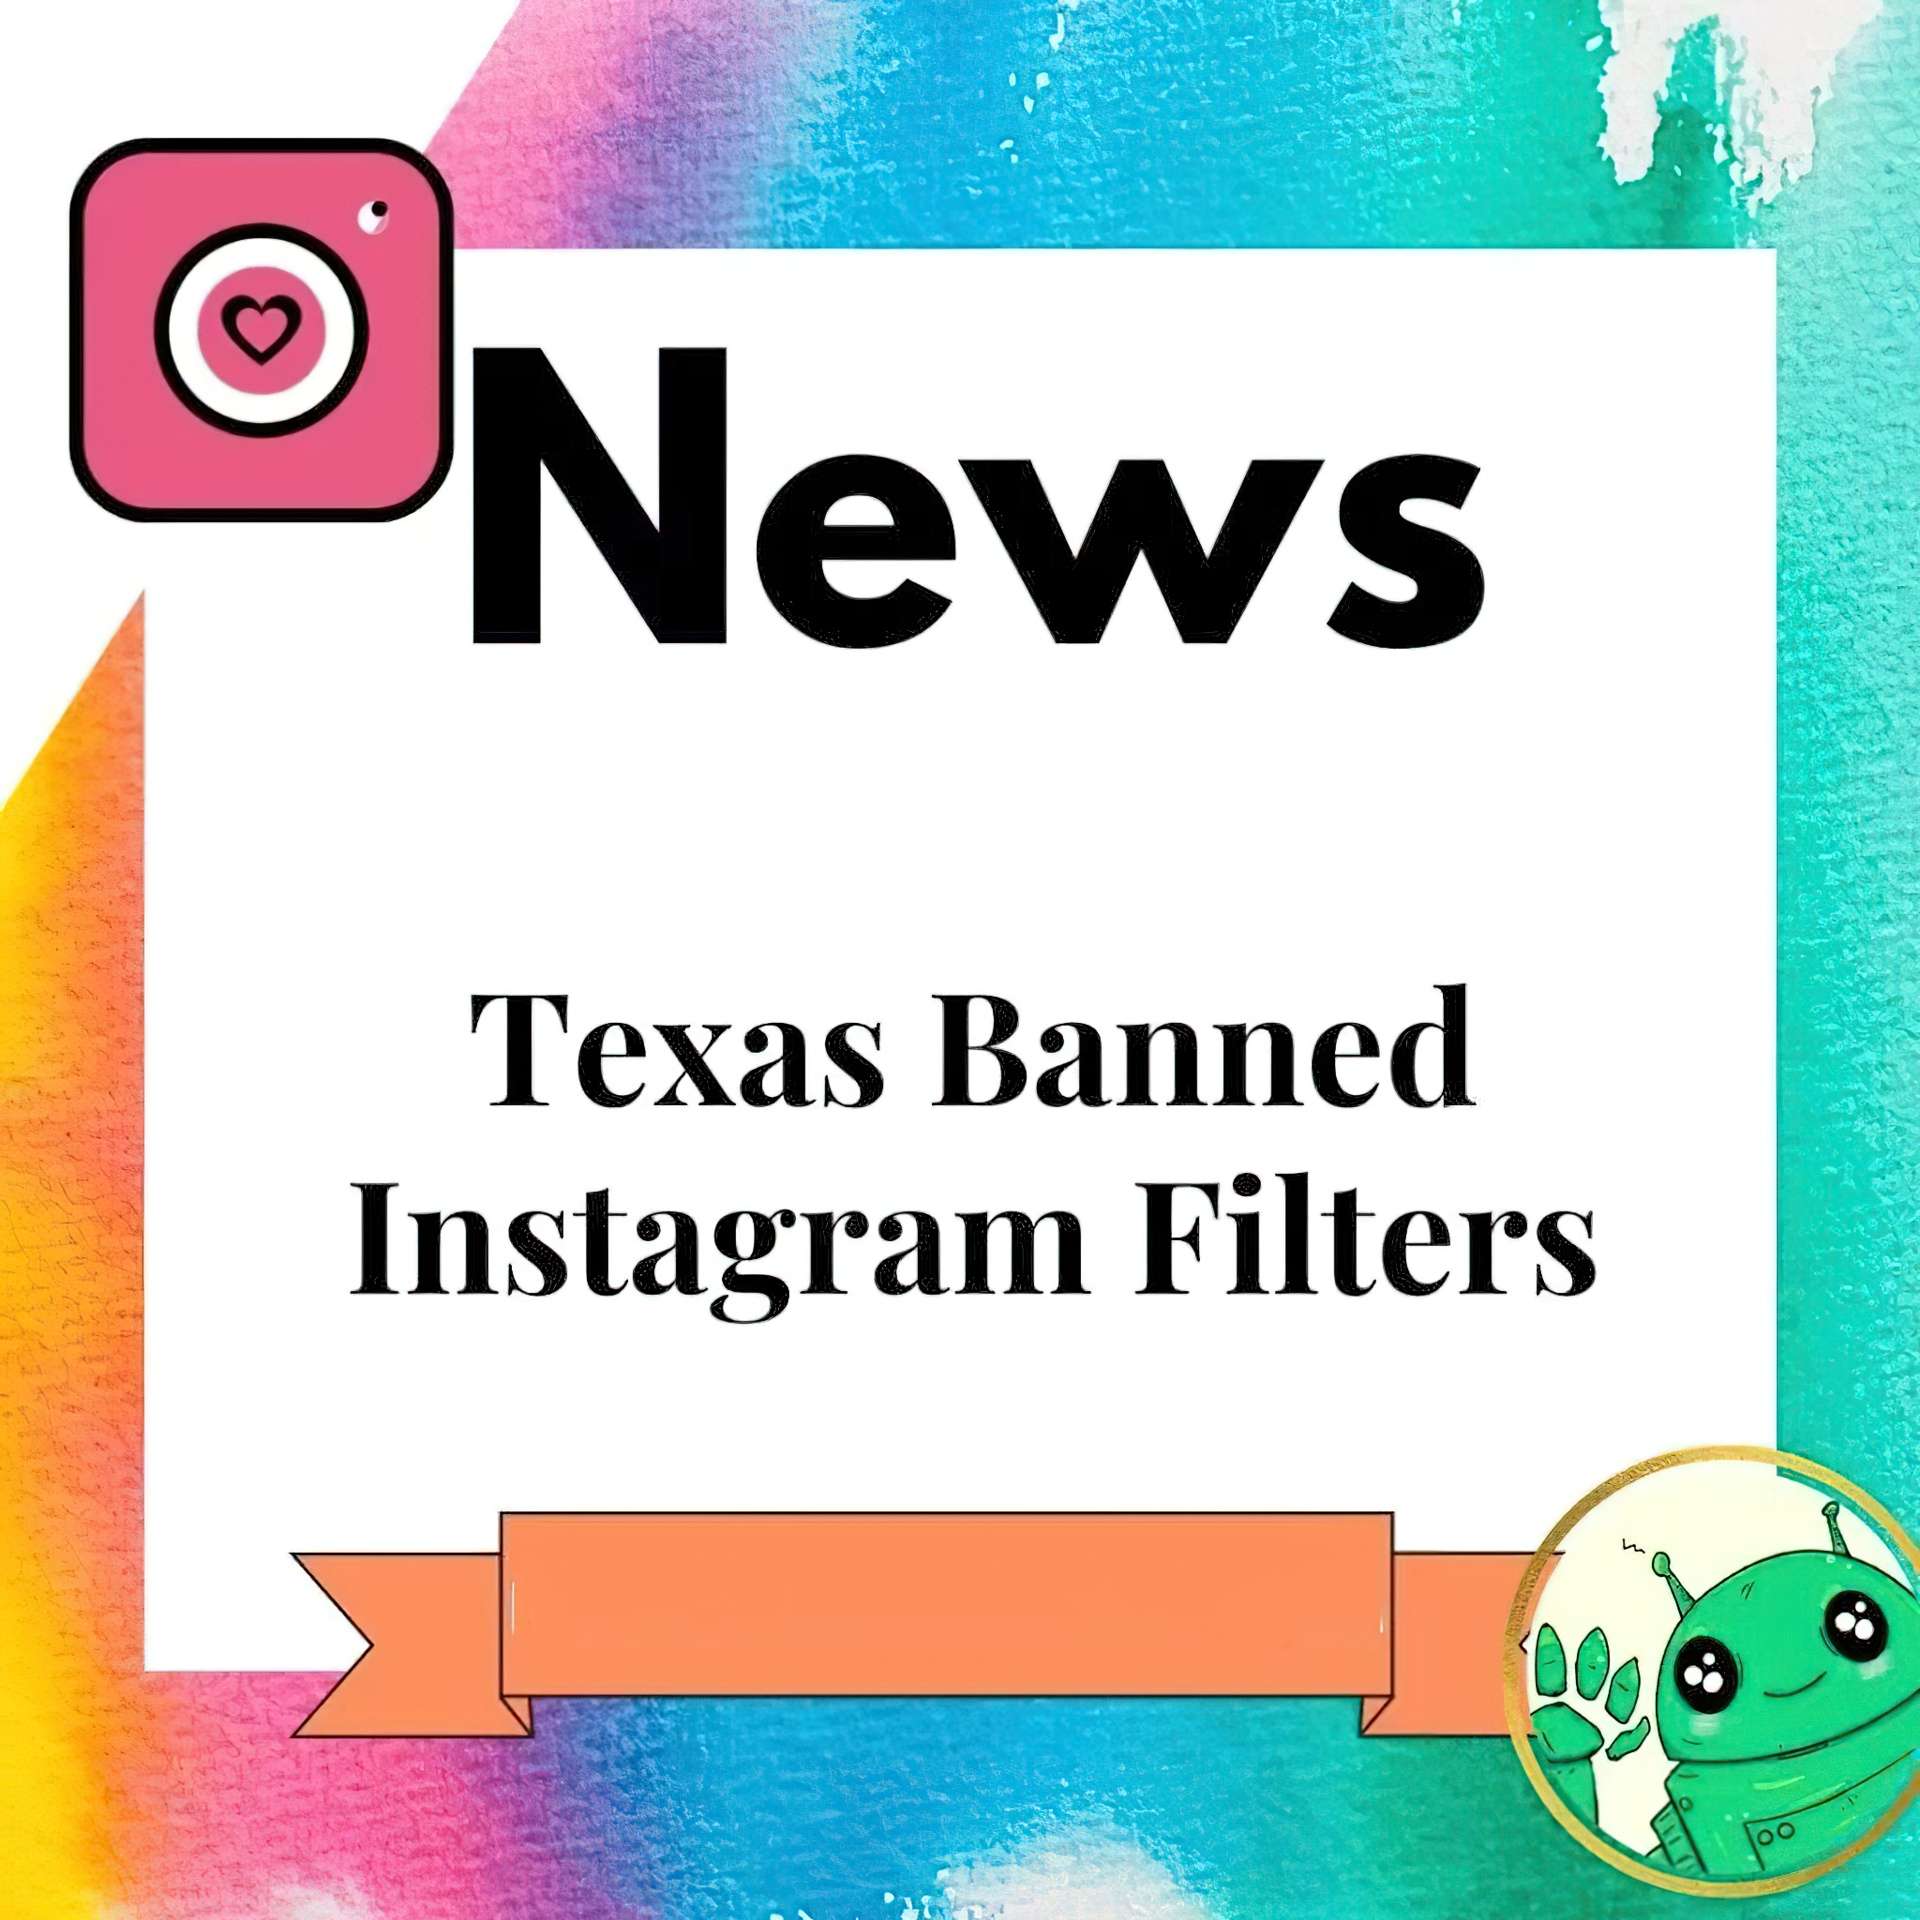 Texas bans Instagram filters after the state of Texas sued Meta, Instagram's parent company, alleging it uses facial recognition technology that is illegal and infringes upon Texans' privacy rights.